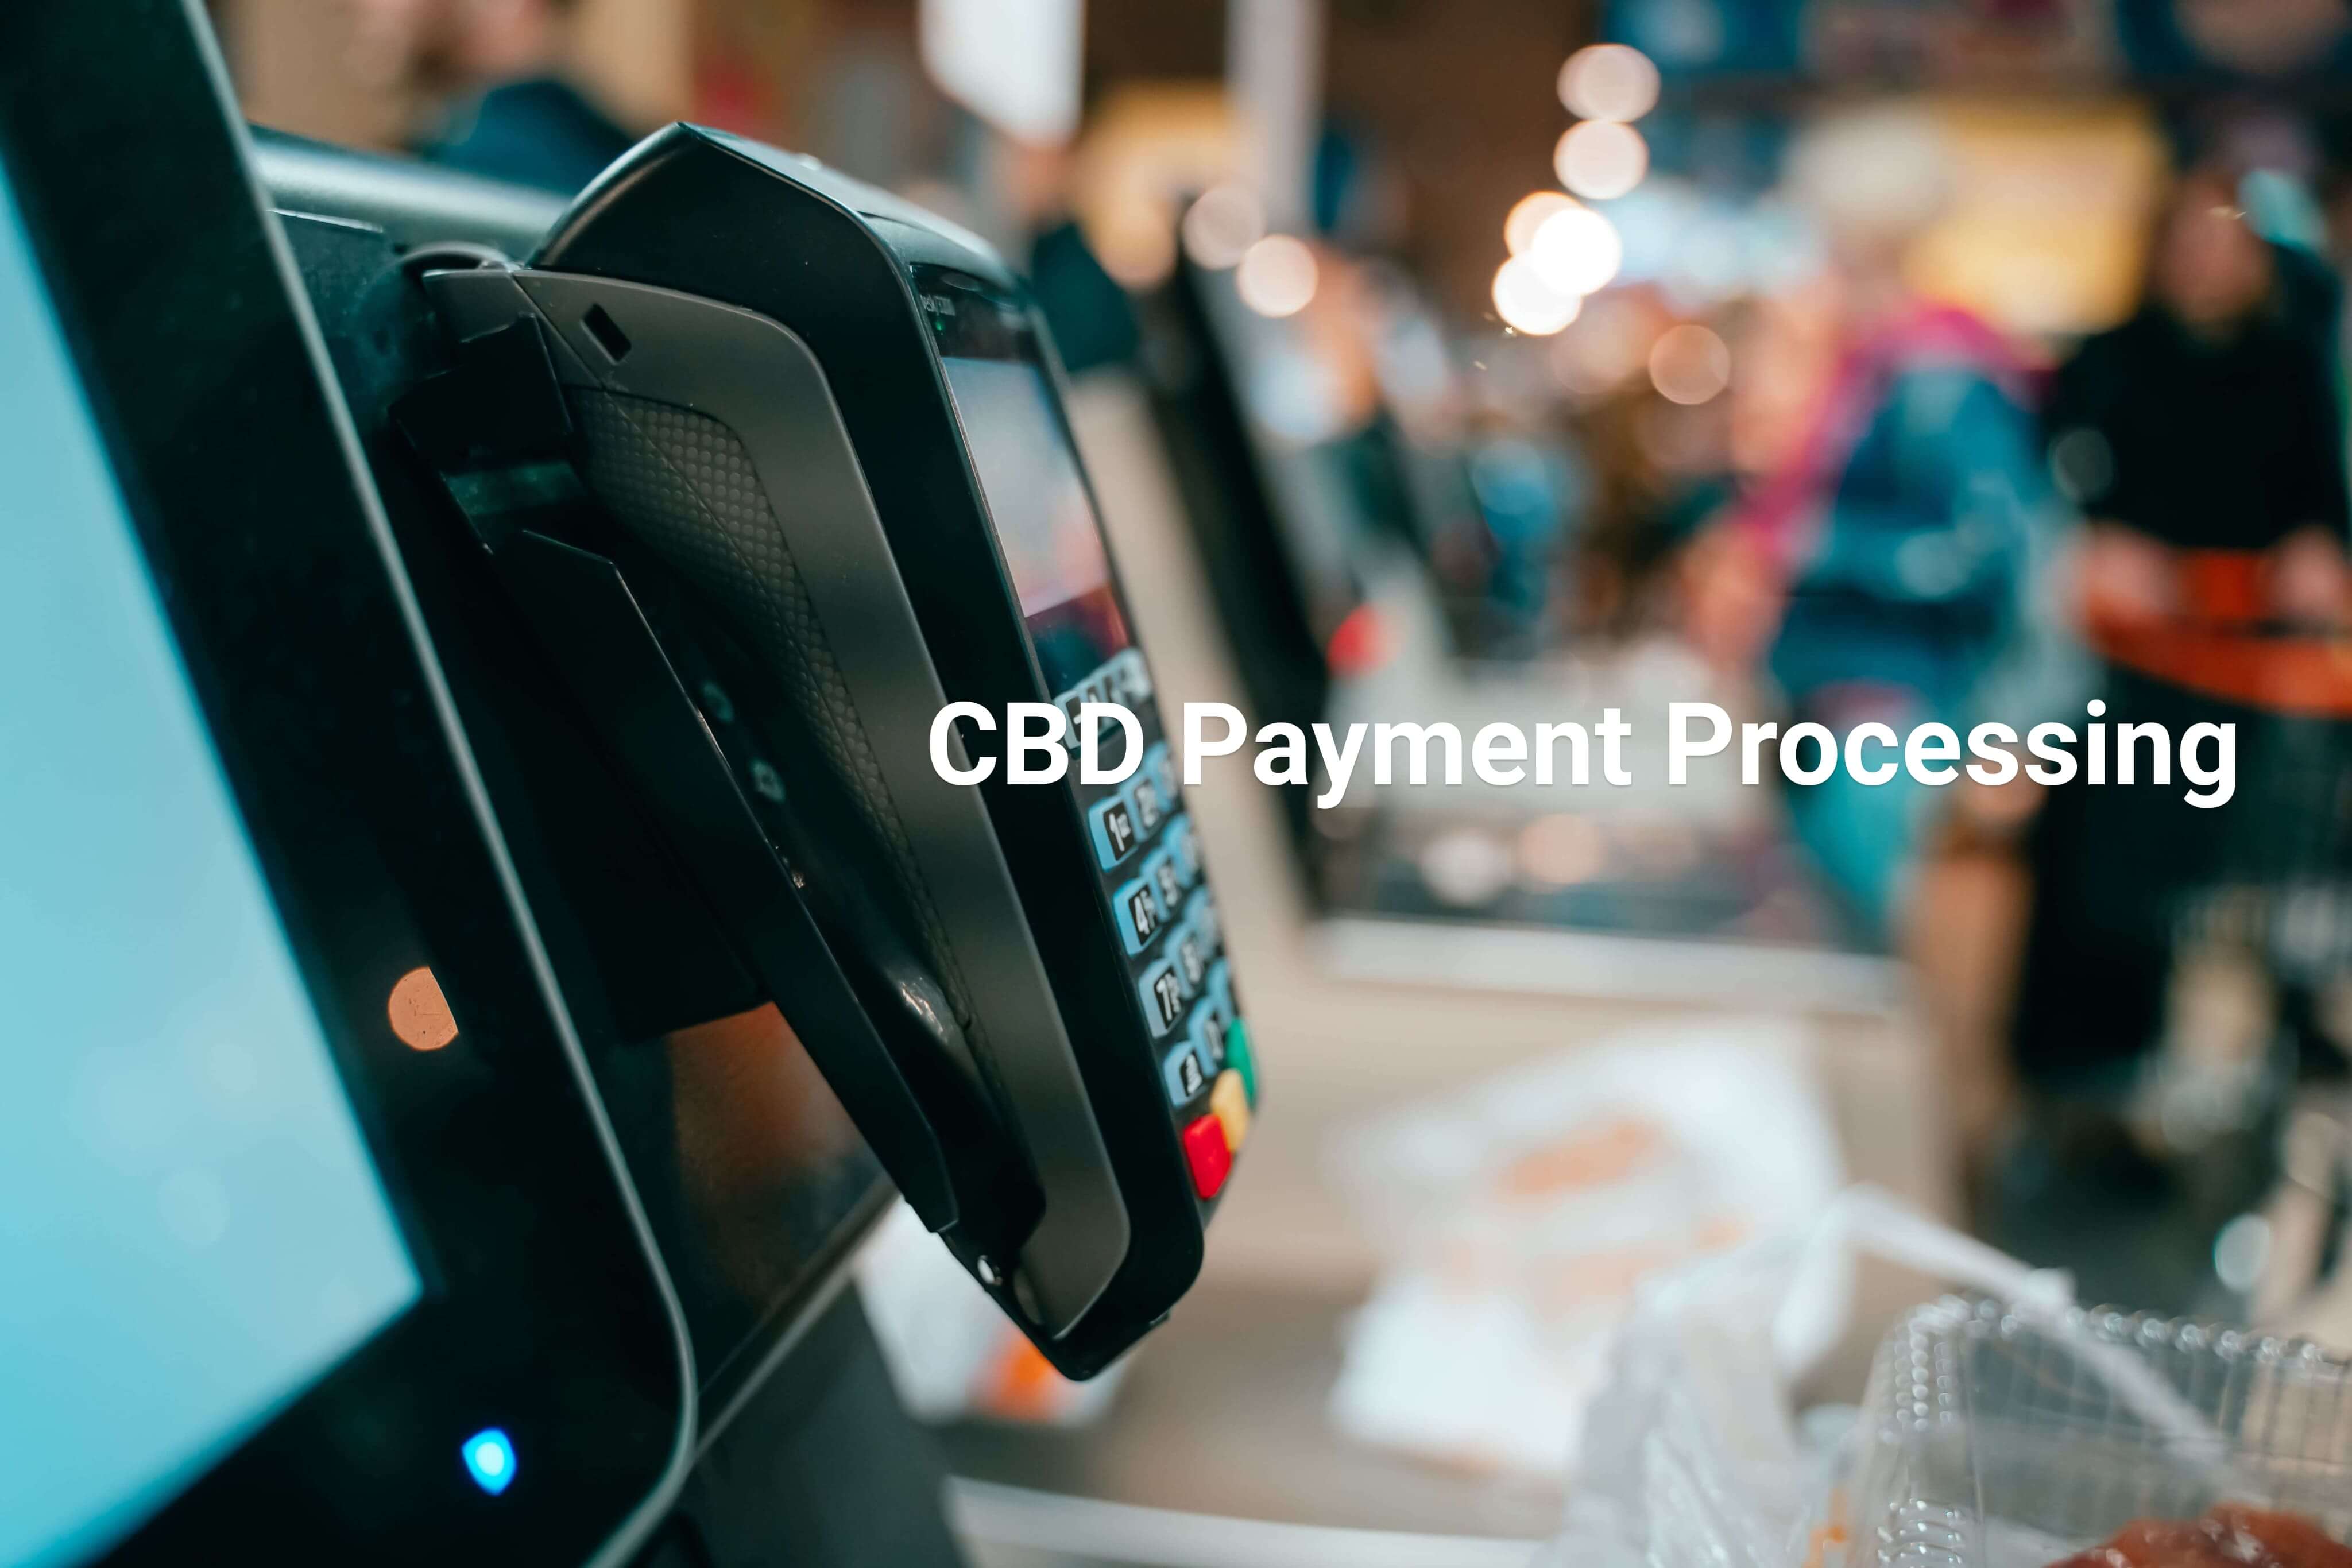 CBD Payment Processing in 2020